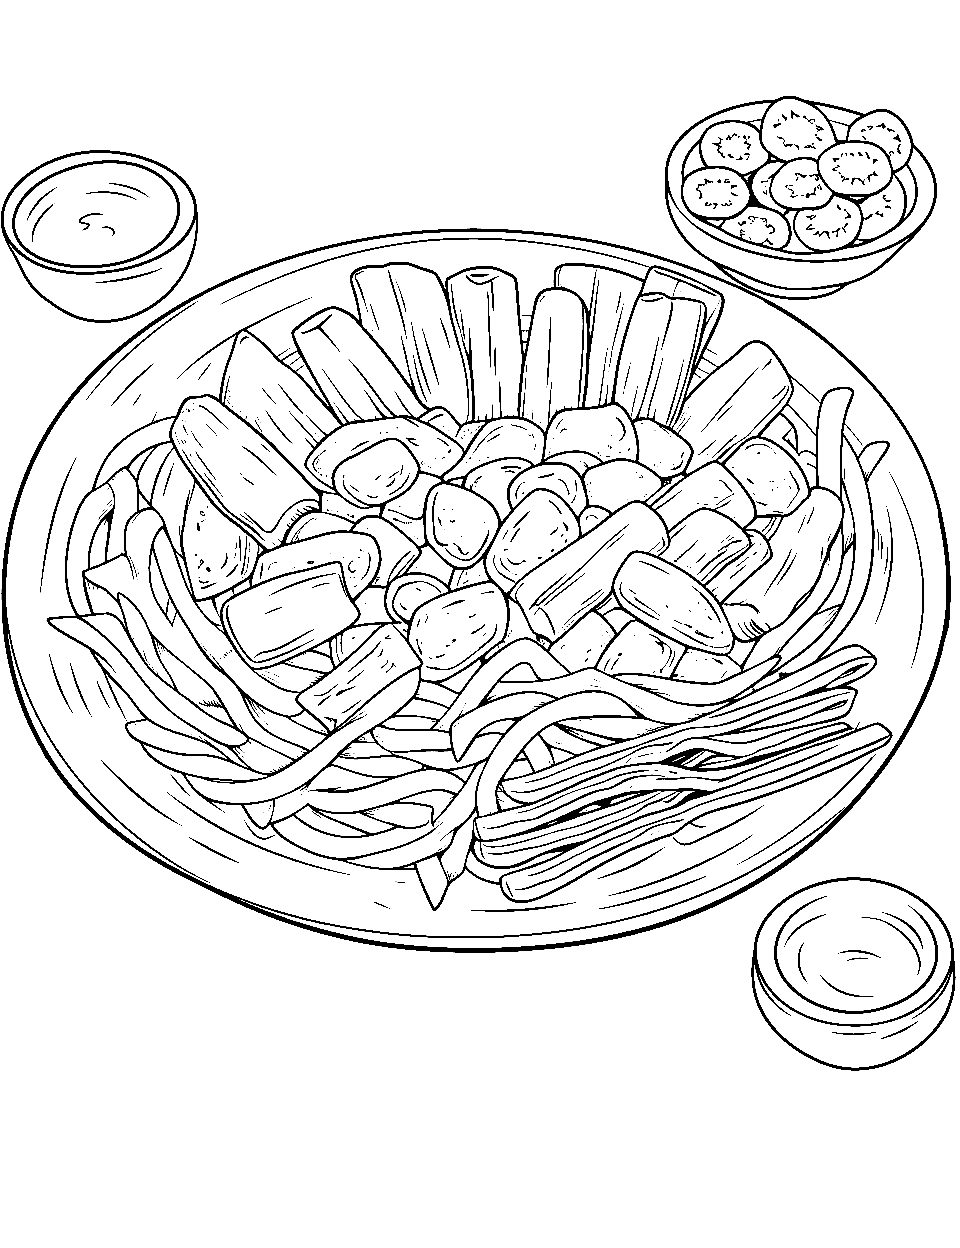 Pasta Night Food Coloring Page - A bowl of creamy pasta and a bunch of sides and sauces.